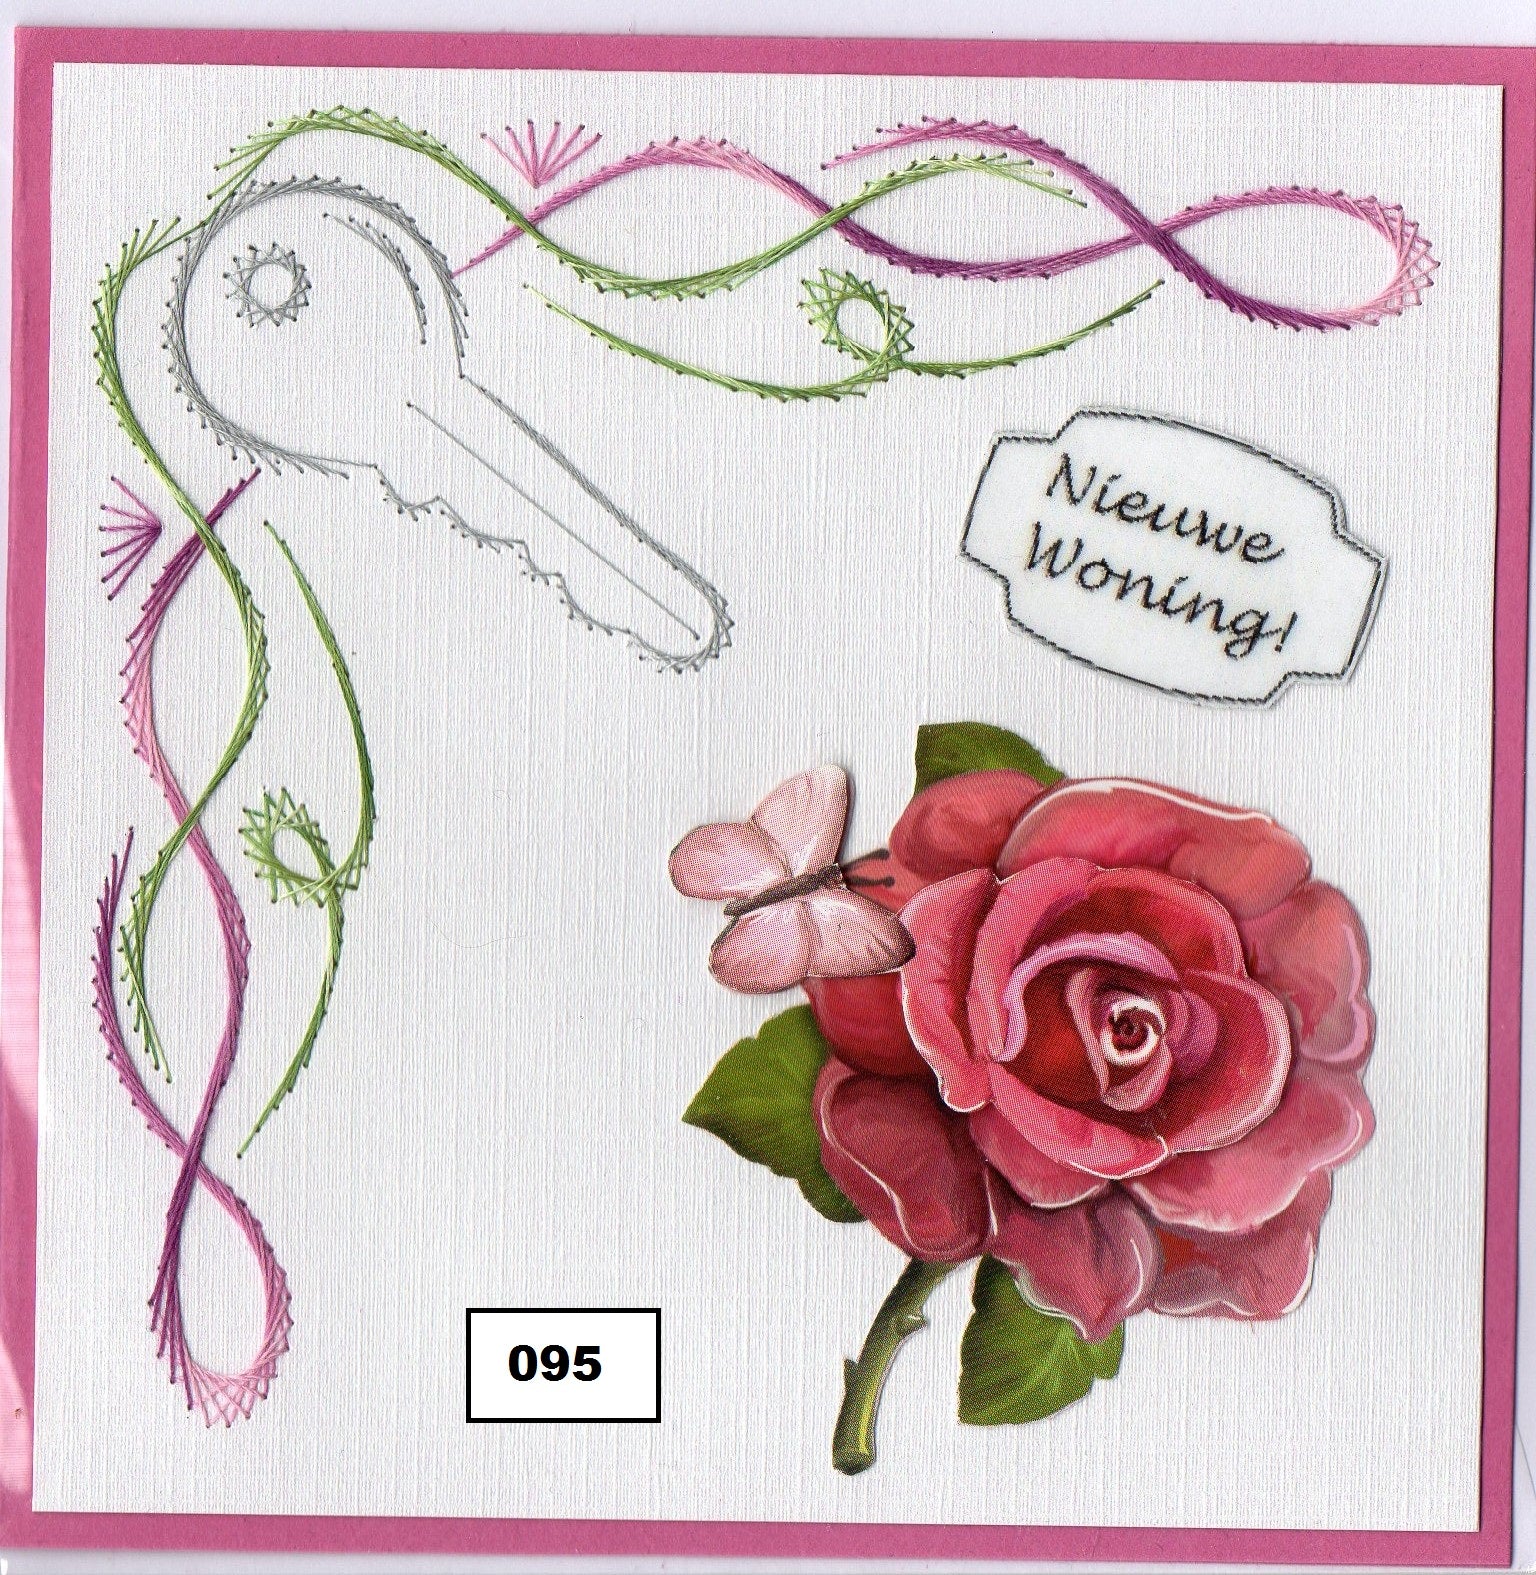 Laura's Design Digital Embroidery Pattern - New Home